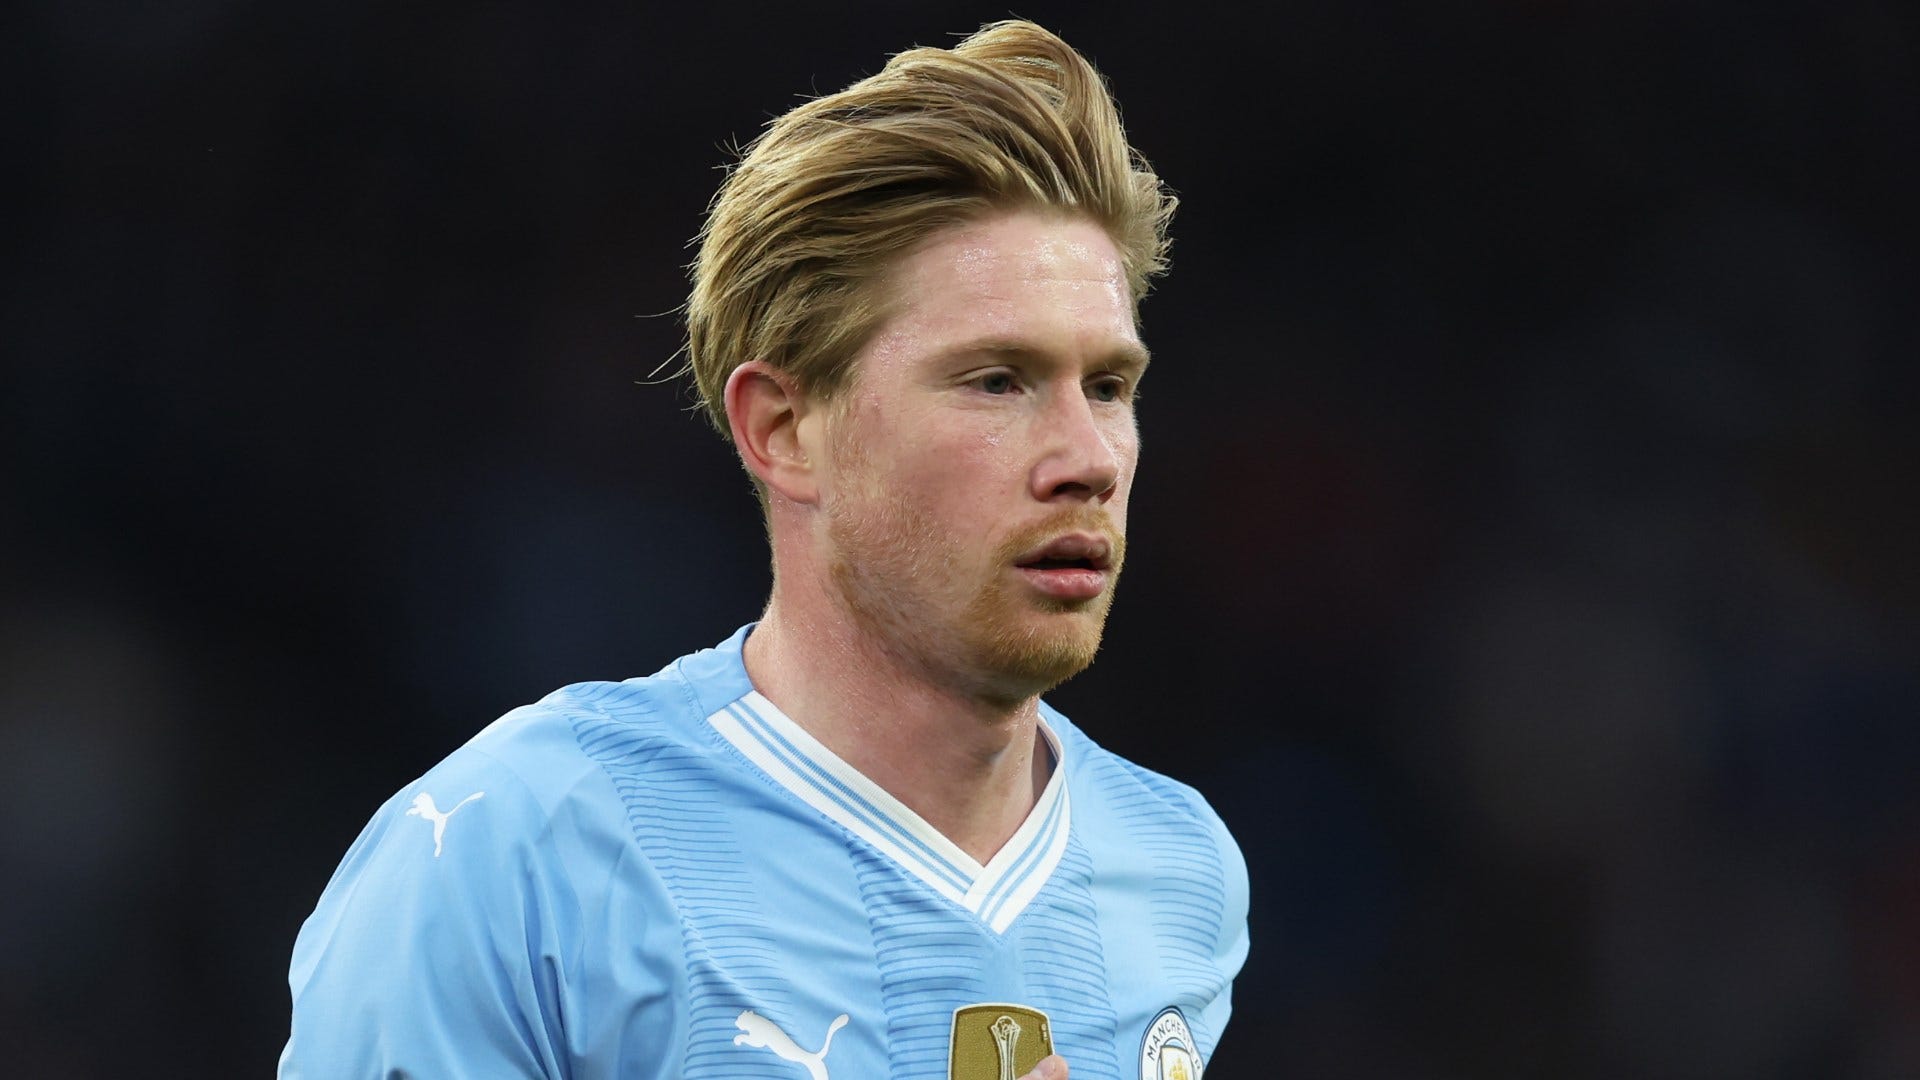 Kevin De Bruyne to leave Man City? Pep Guardiola offers update on midfielder’s future amid MLS and Saudi Pro League transfer links | Goal.com